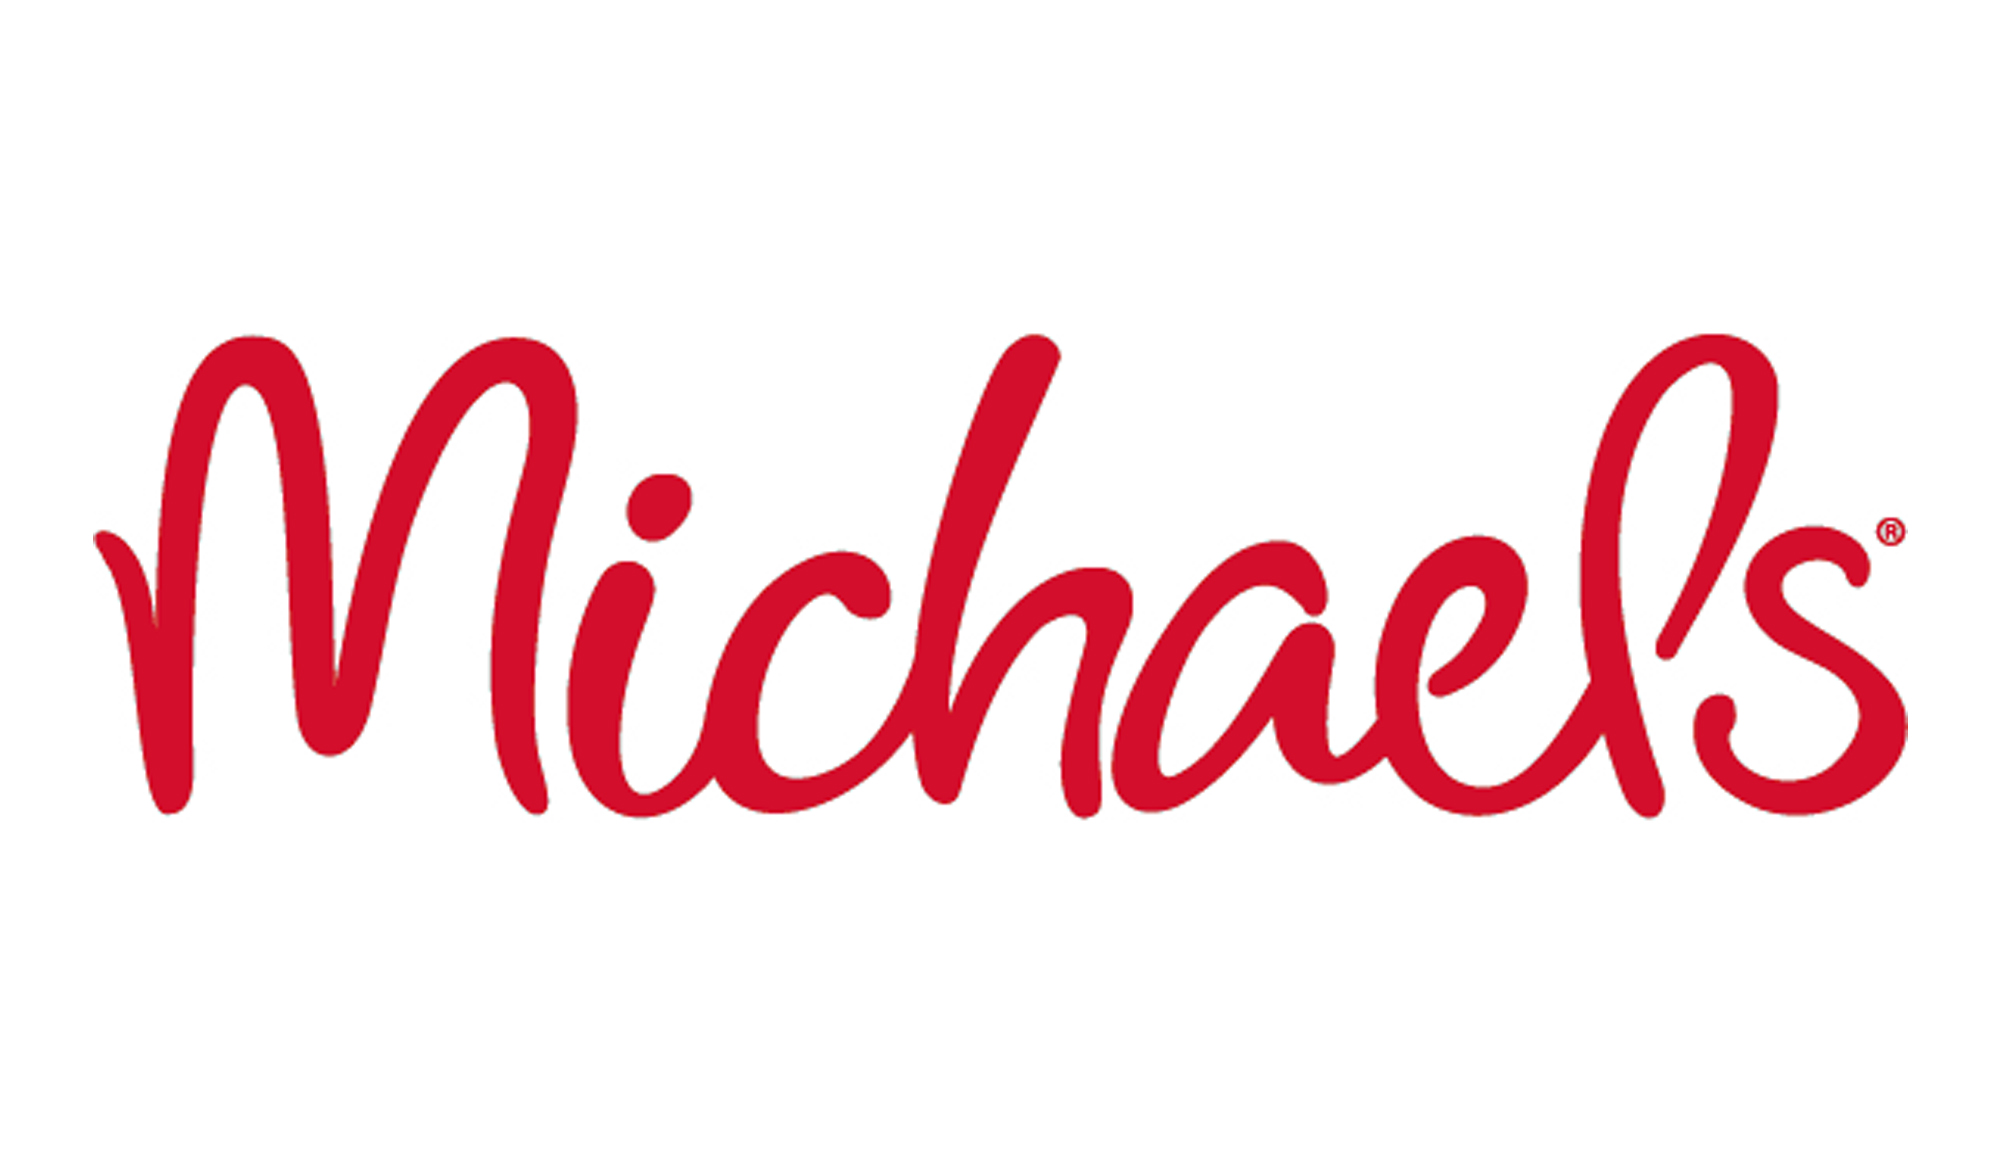 Michaels arts and crafts store logo